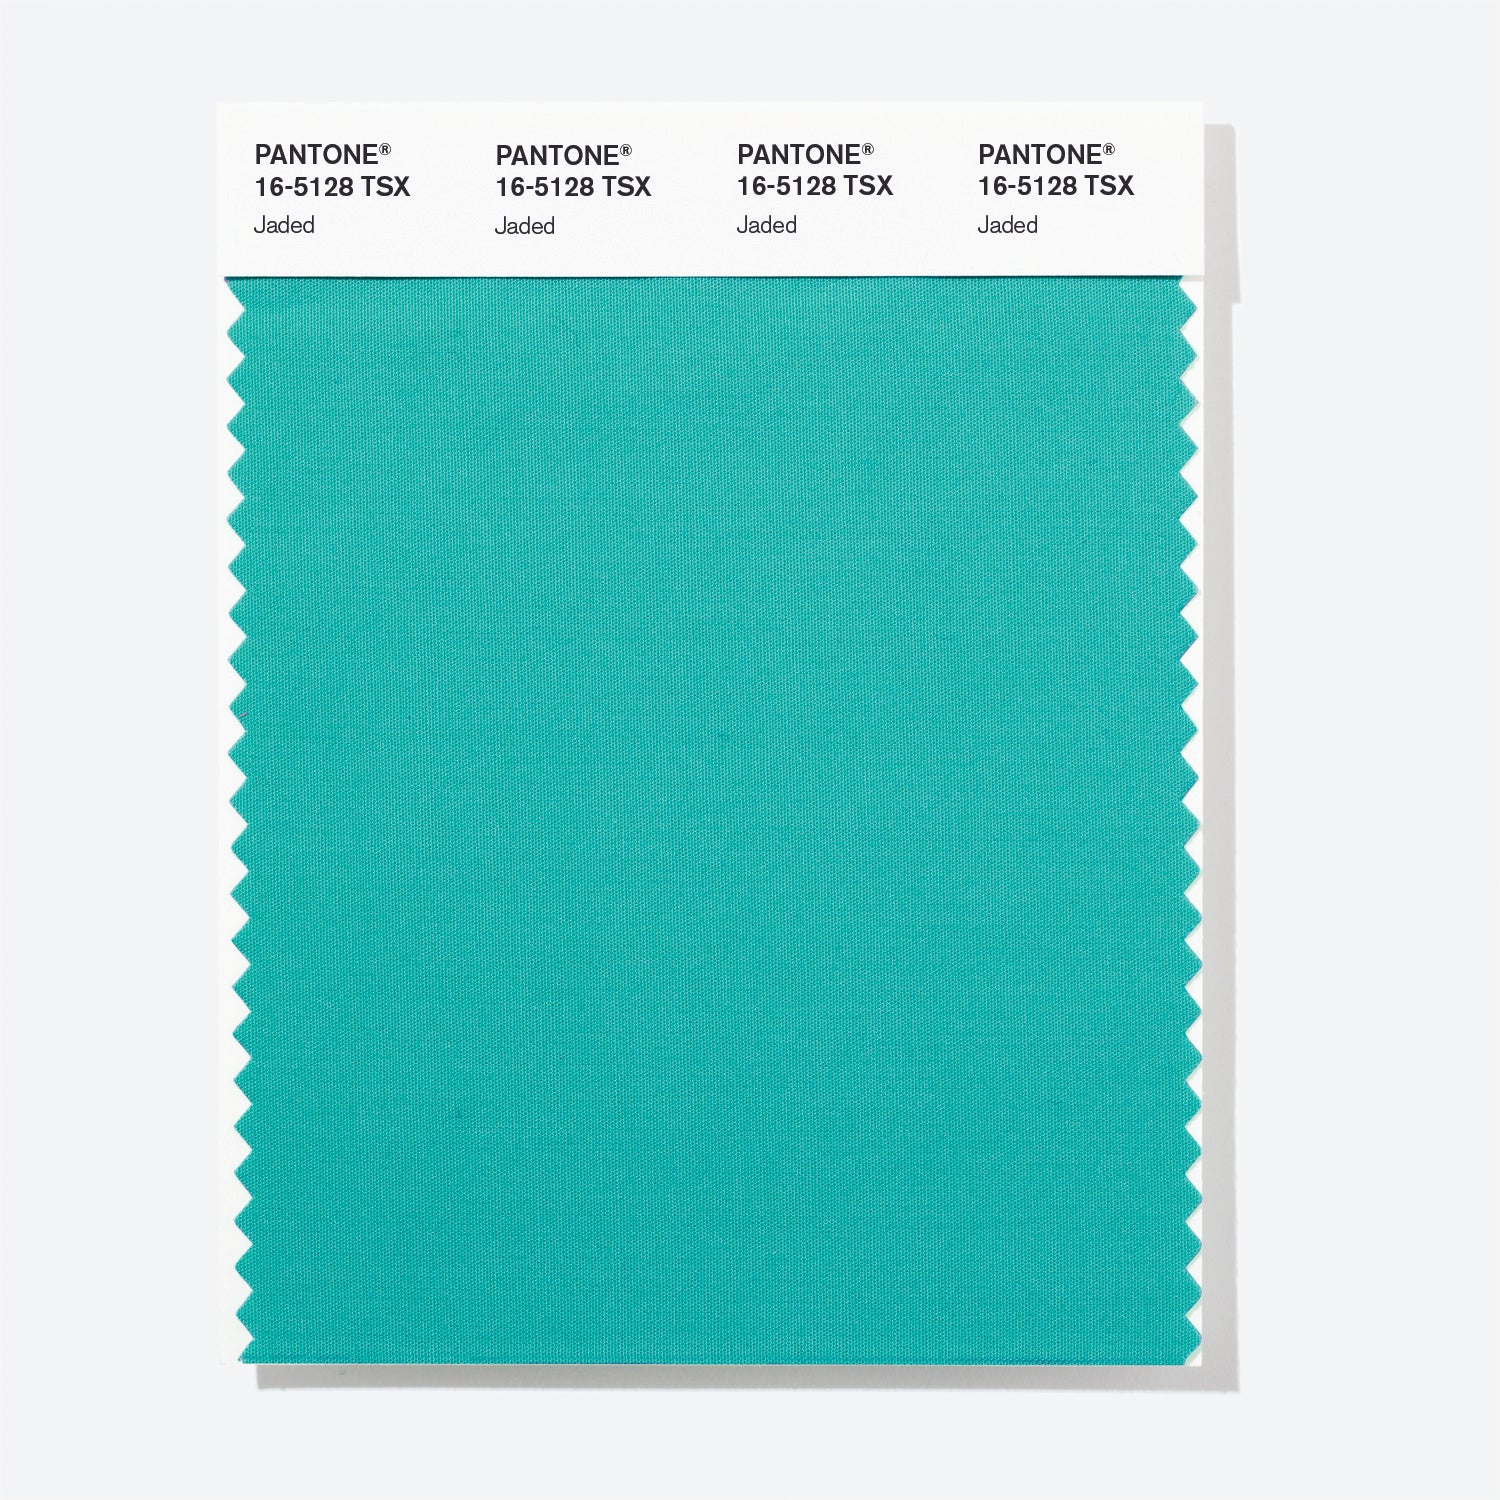 Pantone Polyester Swatch Card 16-5128 TSX (Jaded)